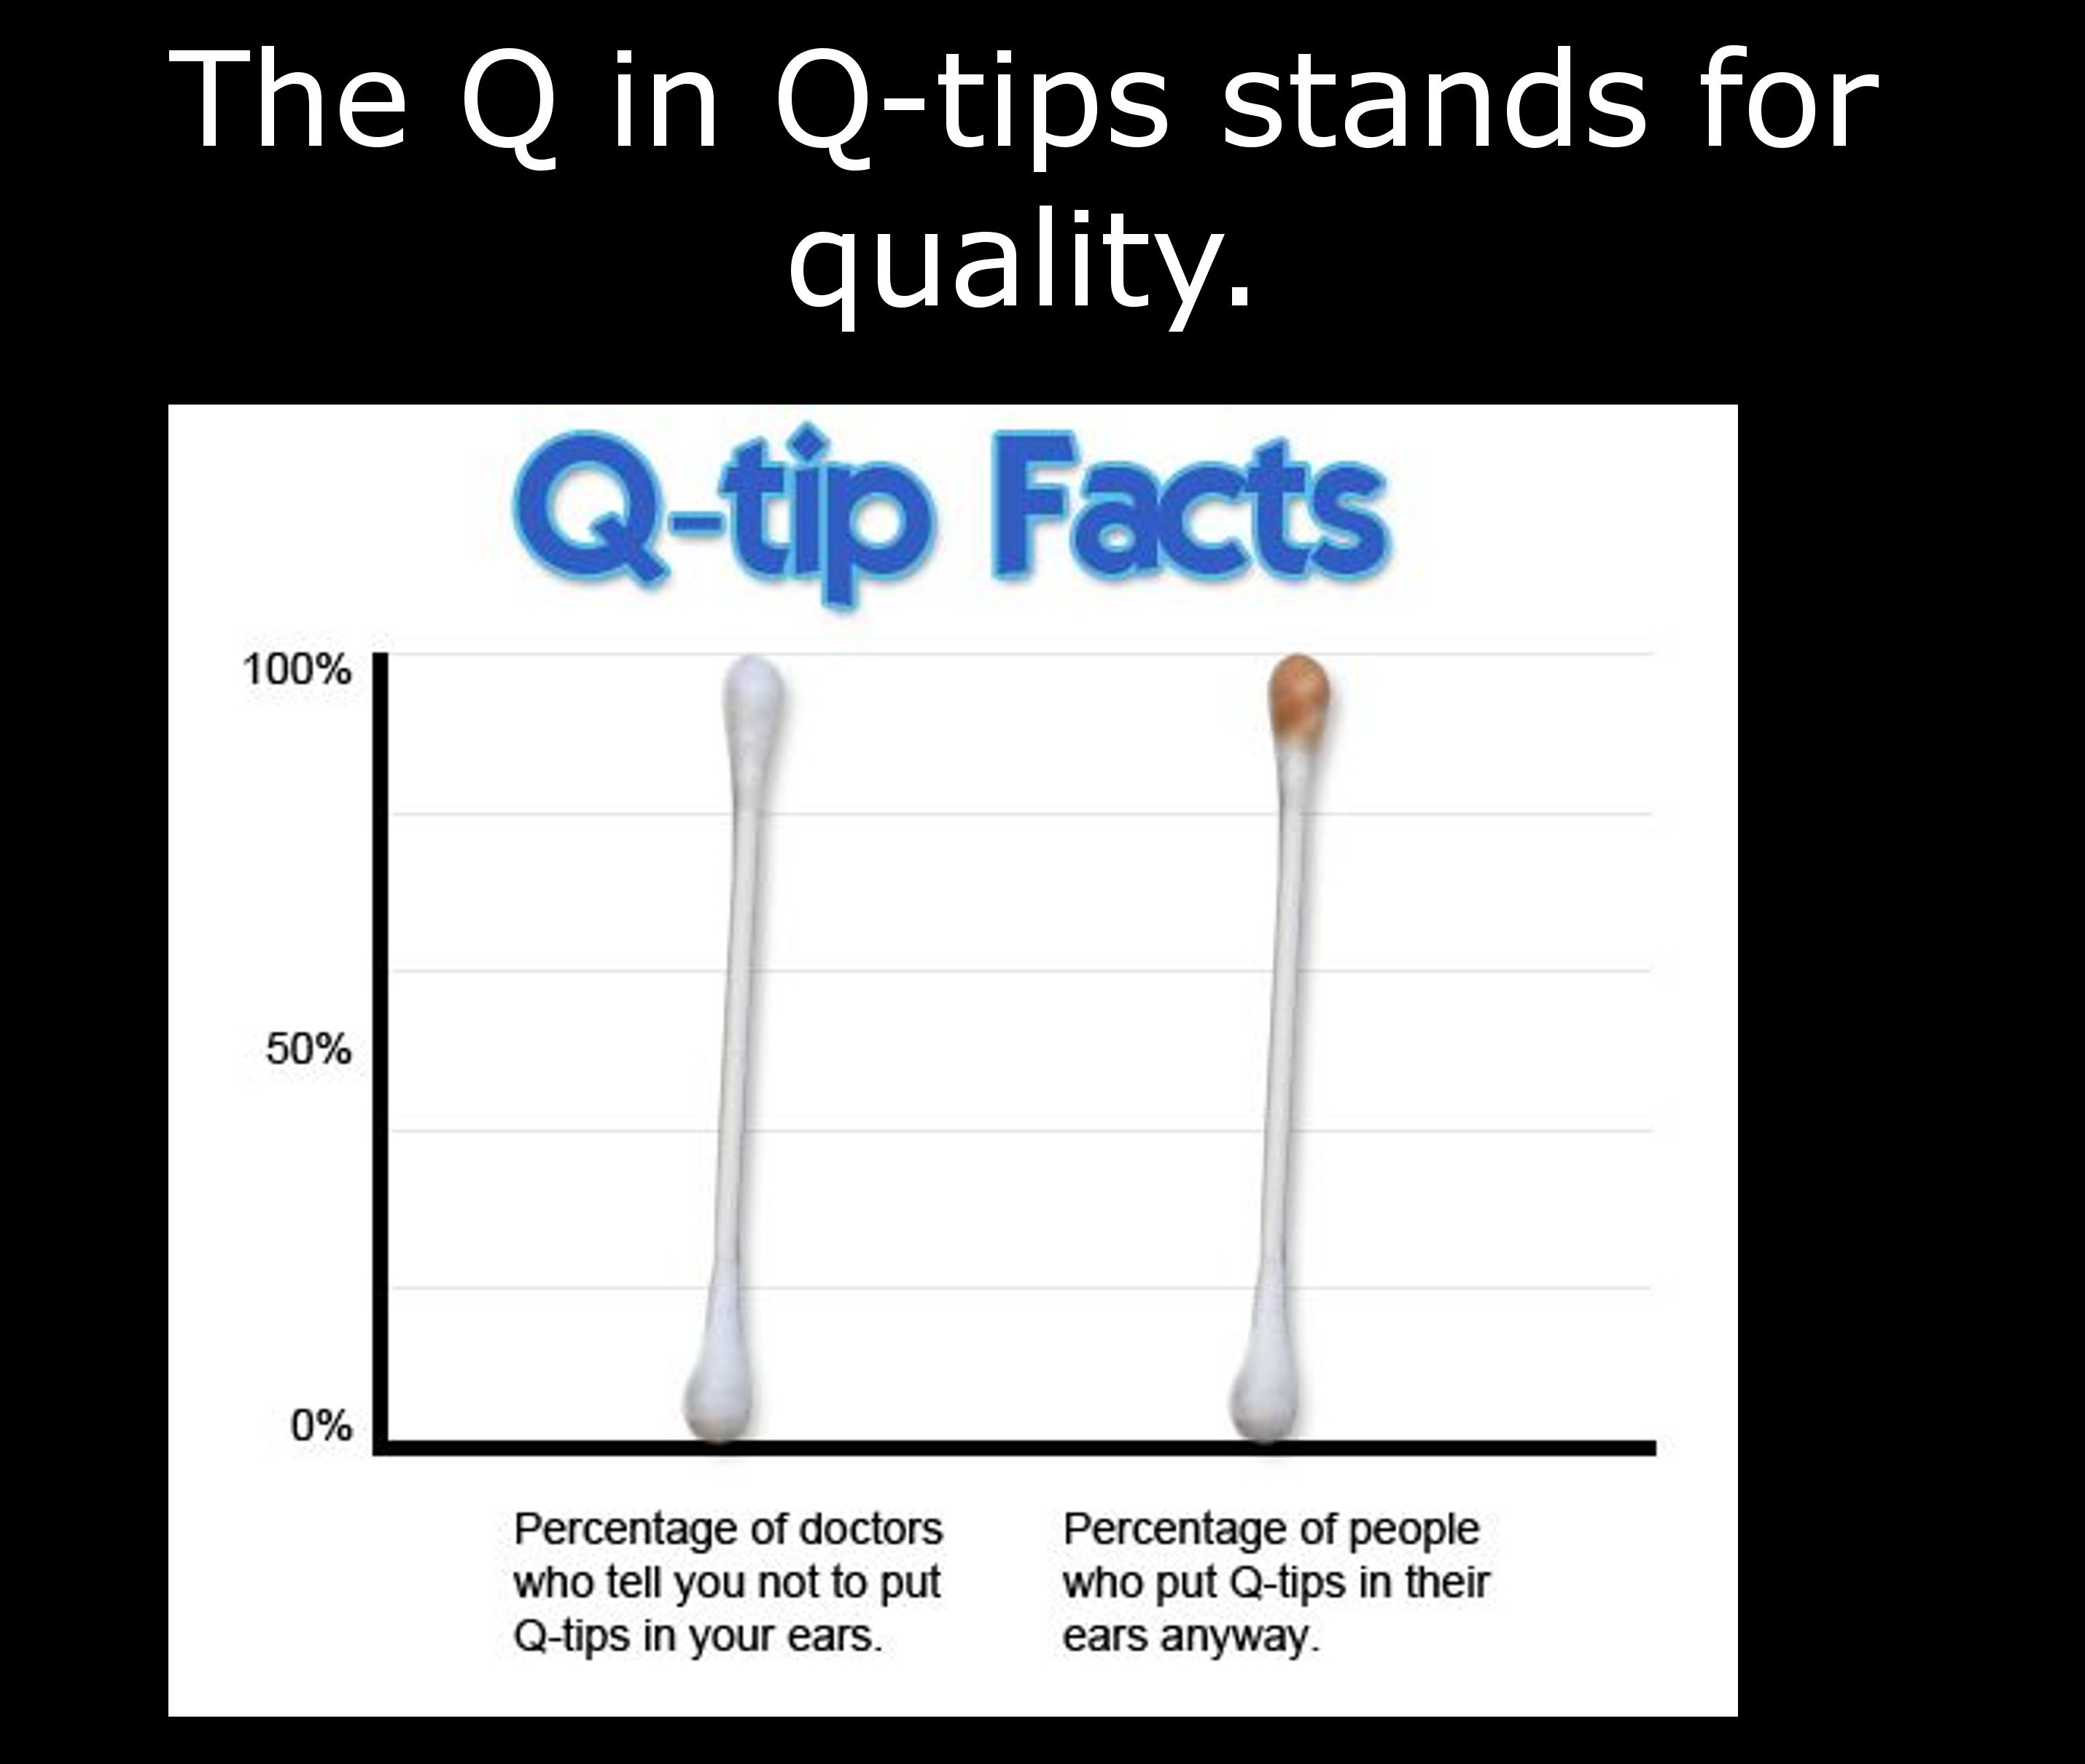 heckscher museum of art - The Q in Qtips stands for quality. Qtip Facts 100% 50% 0% Percentage of doctors who tell you not to put Qtips in your ears. Percentage of people who put Qtips in their ears anyway.